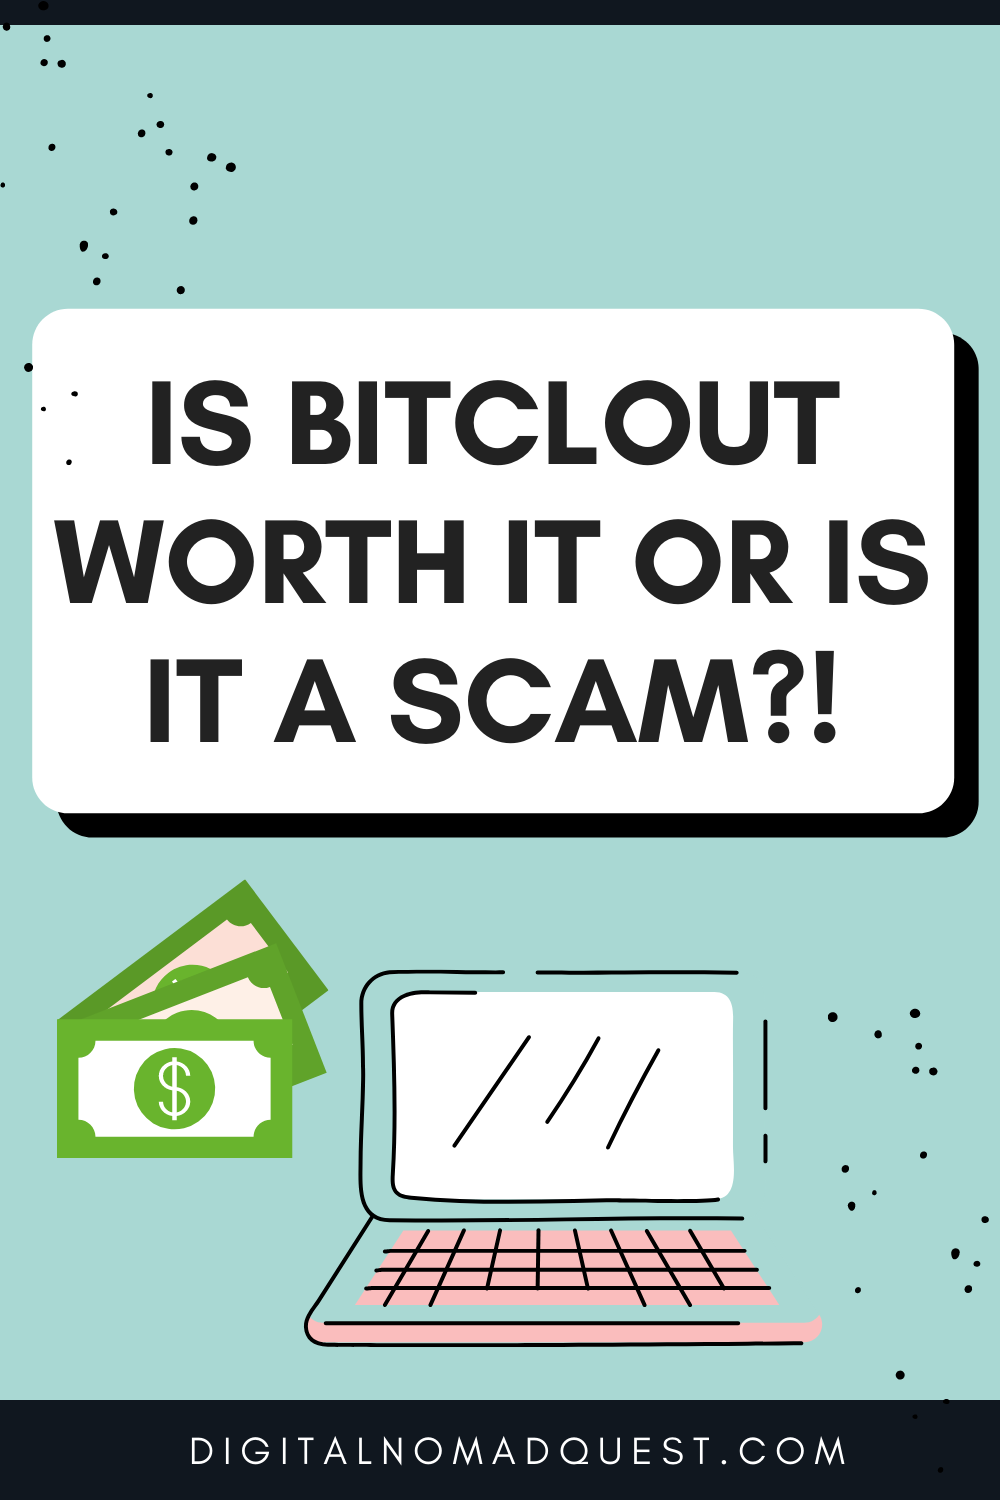 is bitclout worth it or is bitclout a scam